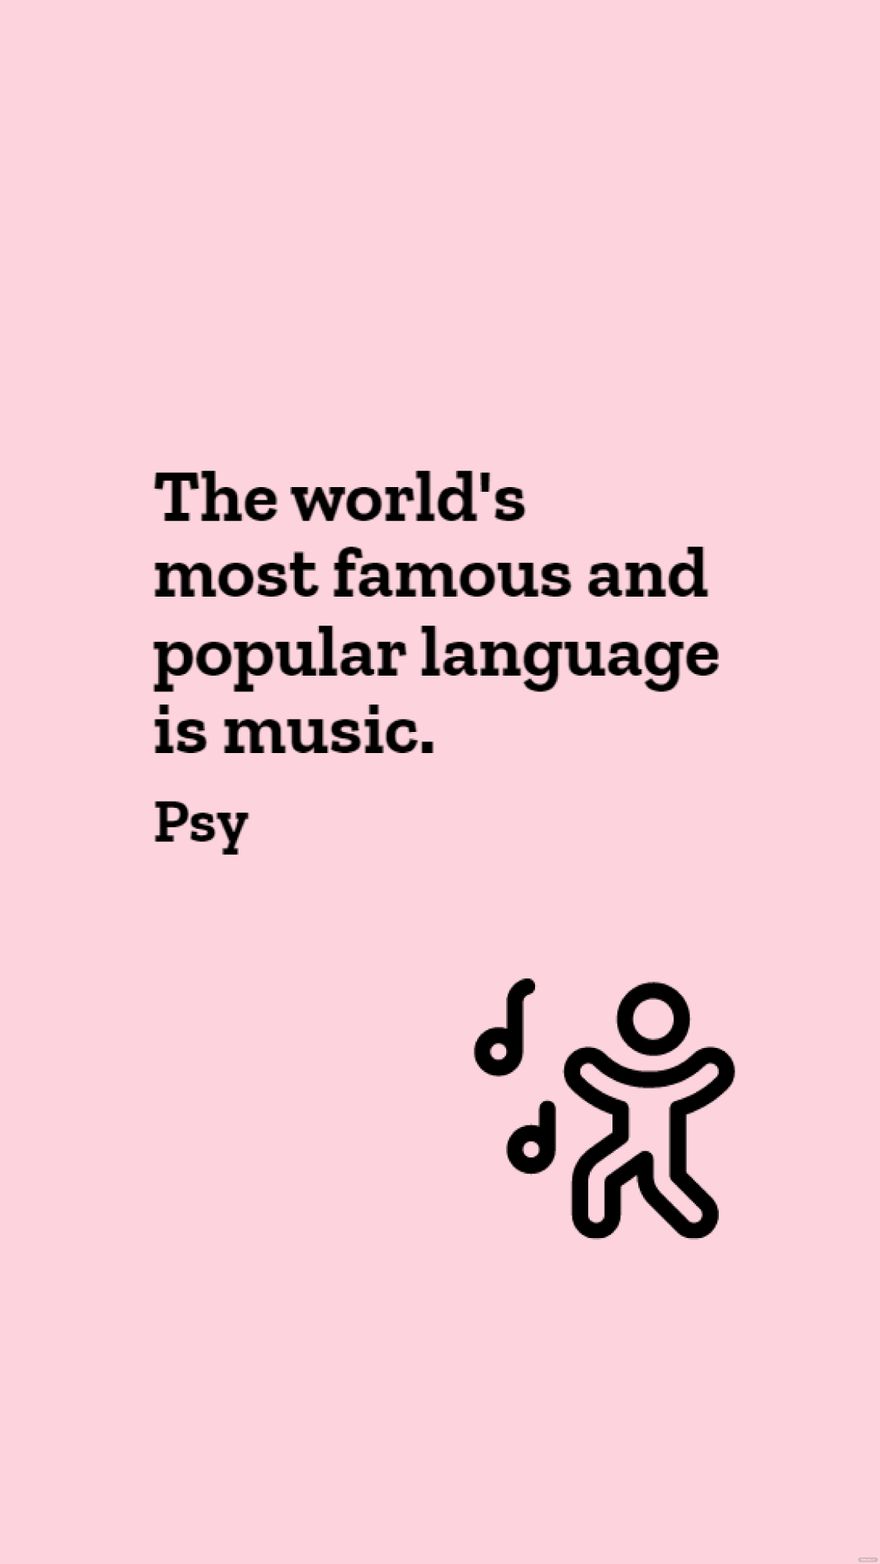 Psy - The world's most famous and popular language is music. in JPG